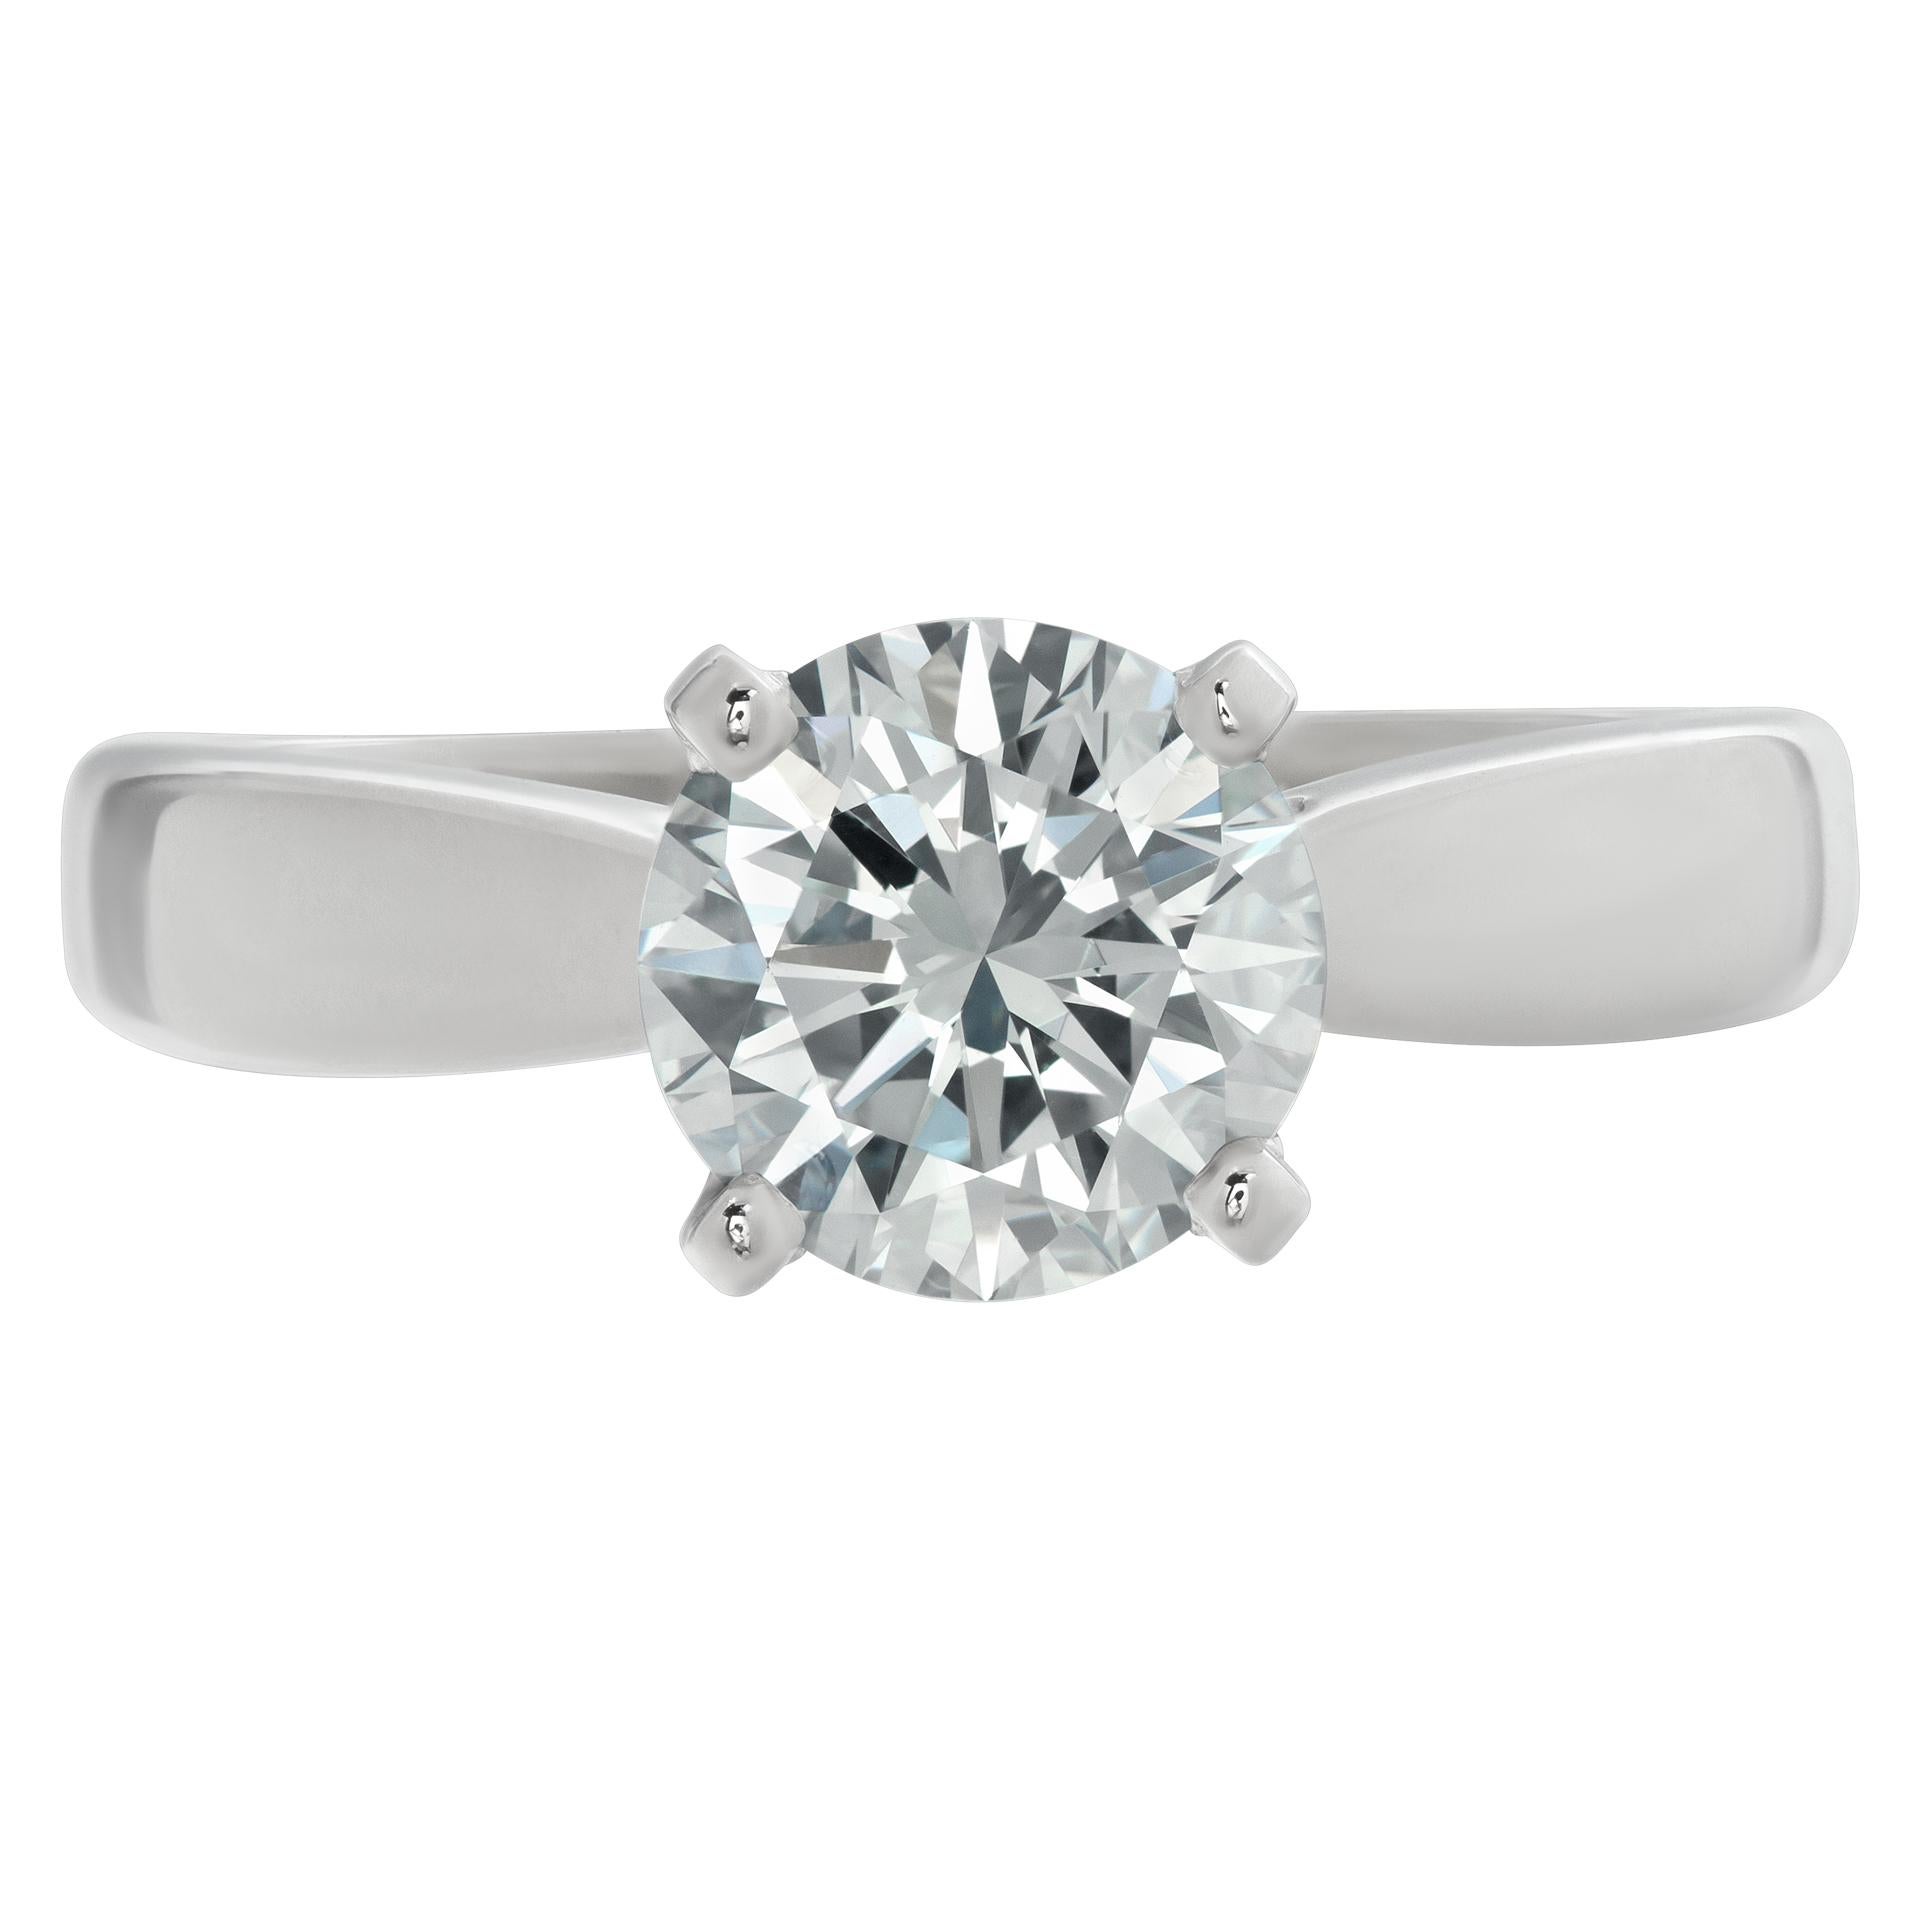 GIA certified round brilliant cut 1.78 carat diamond (I color, VS1 clarity, Excellent cut, Excellent polish, Excellent symmetry) ring set in classic 4 prong platinum setting. Size 7This GIA certified ring is currently size 7 and some items can be